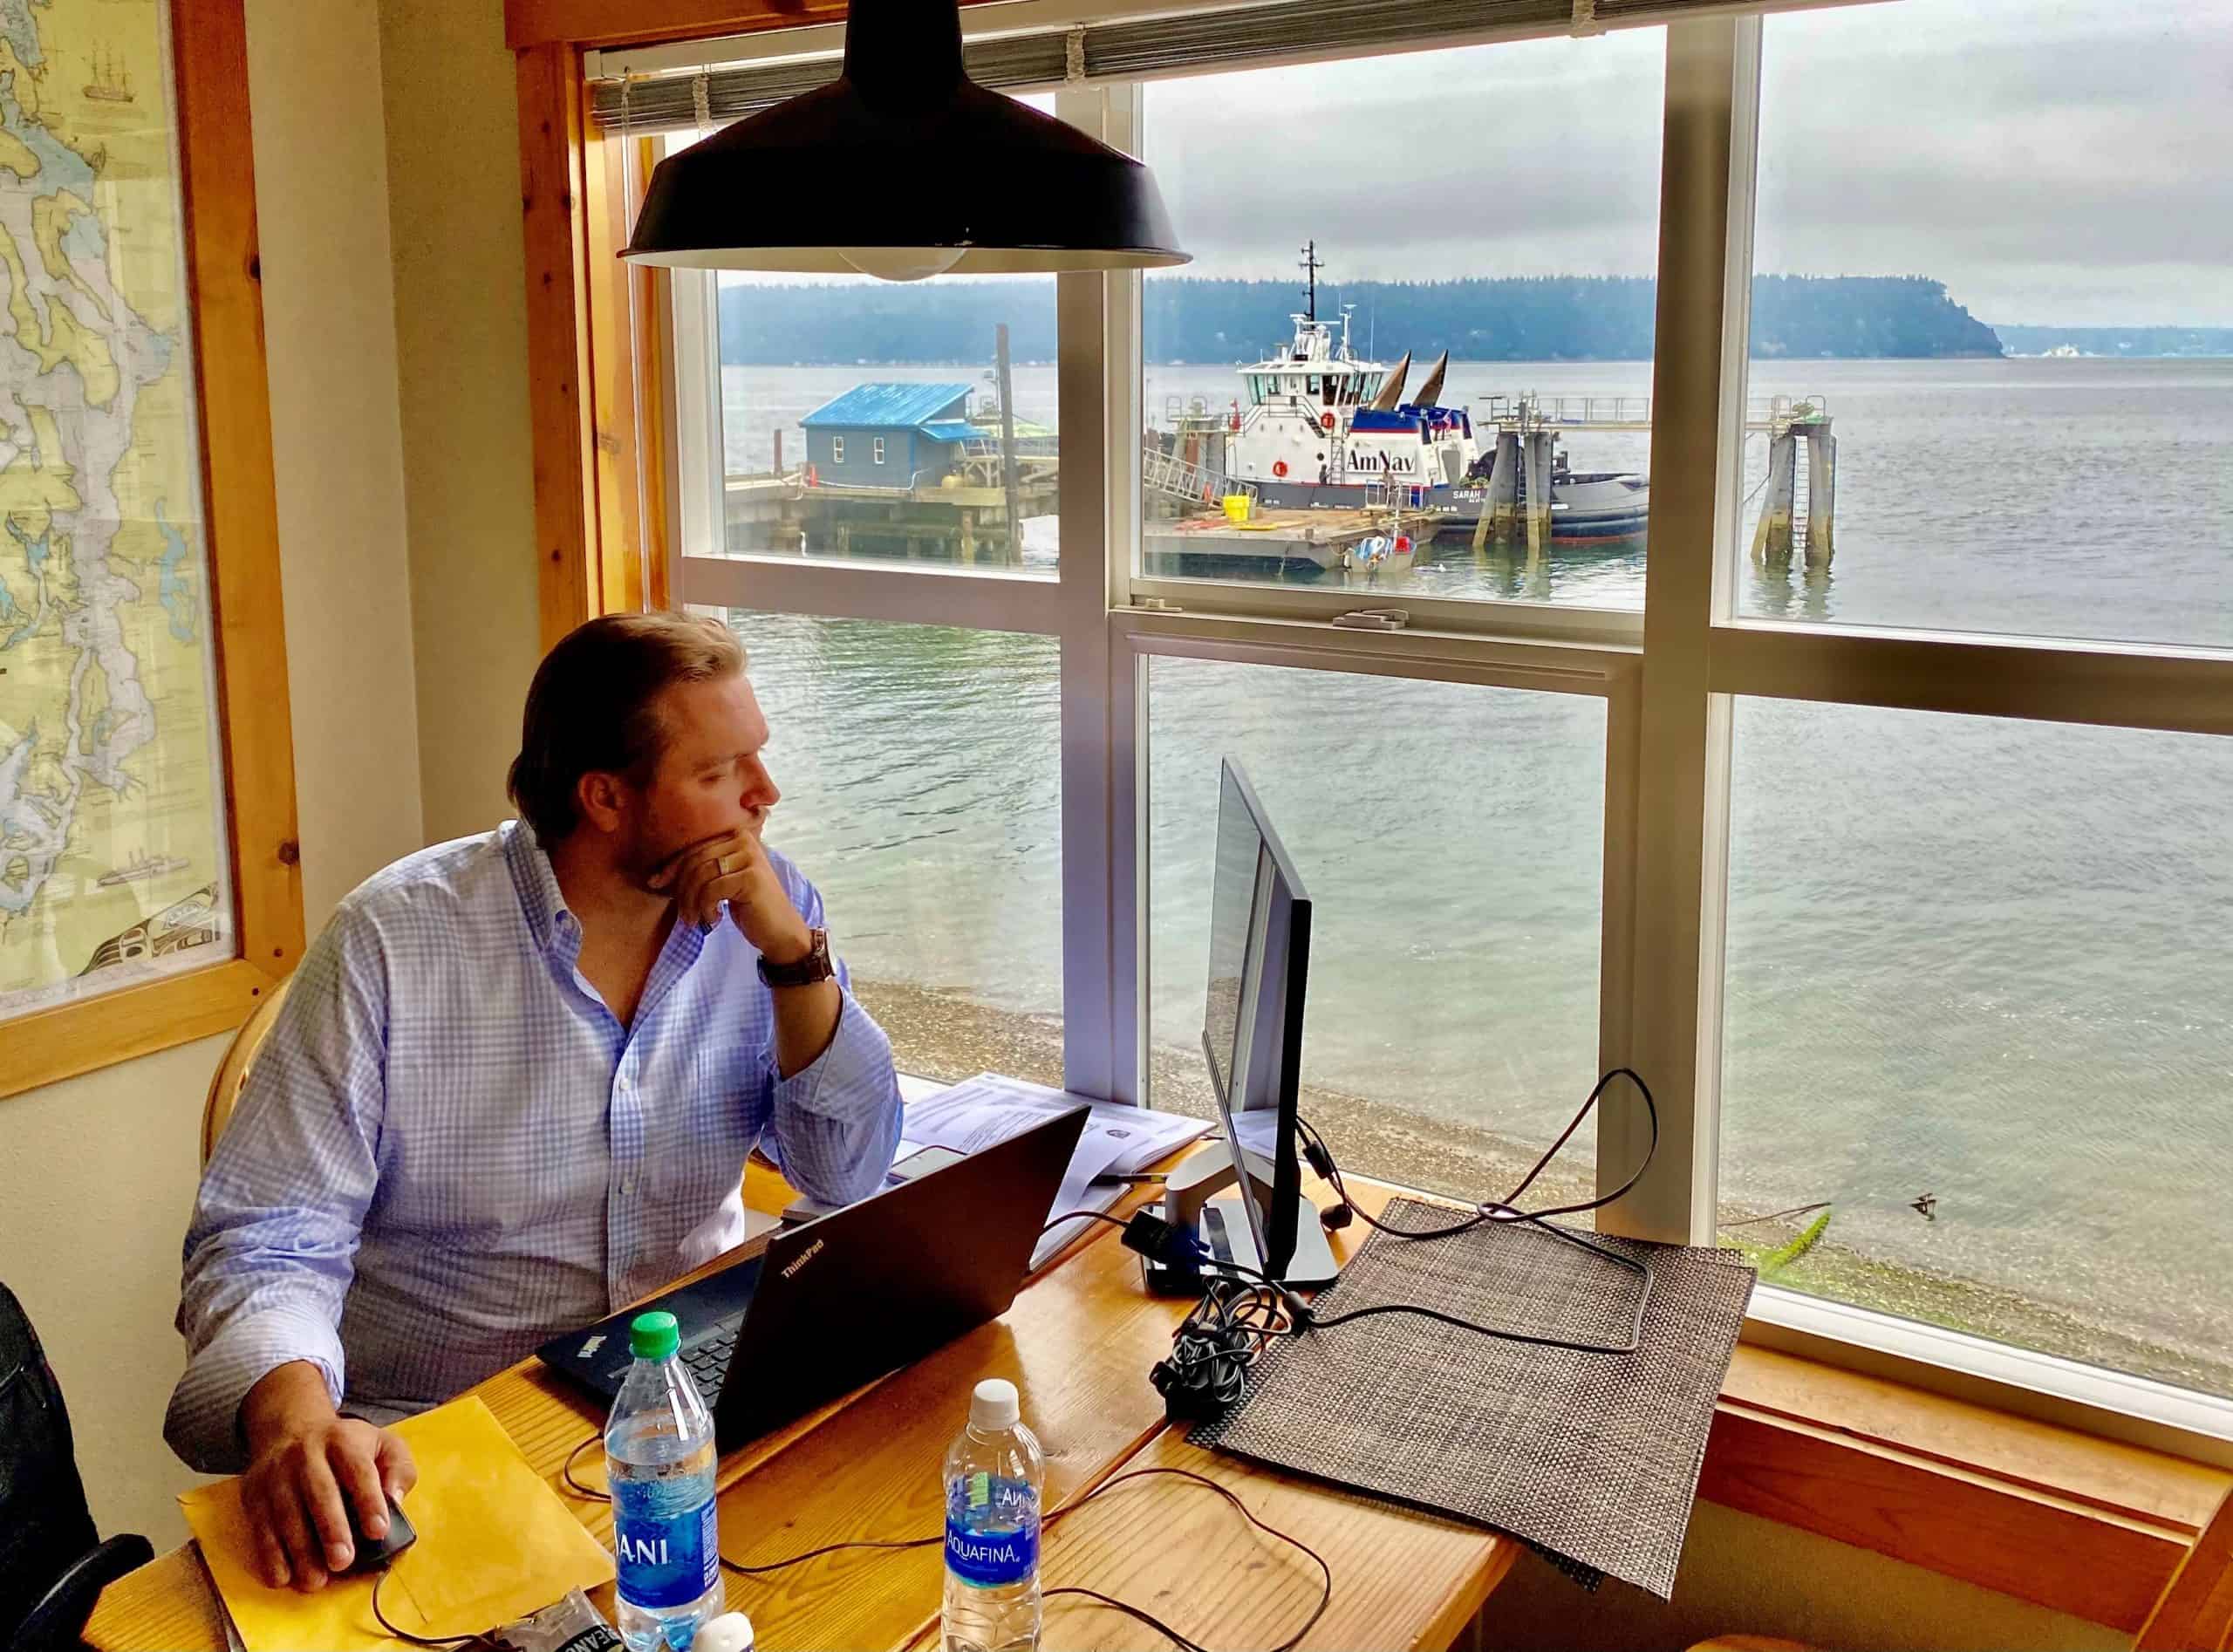 Westlund looks out his office window on a harbor.